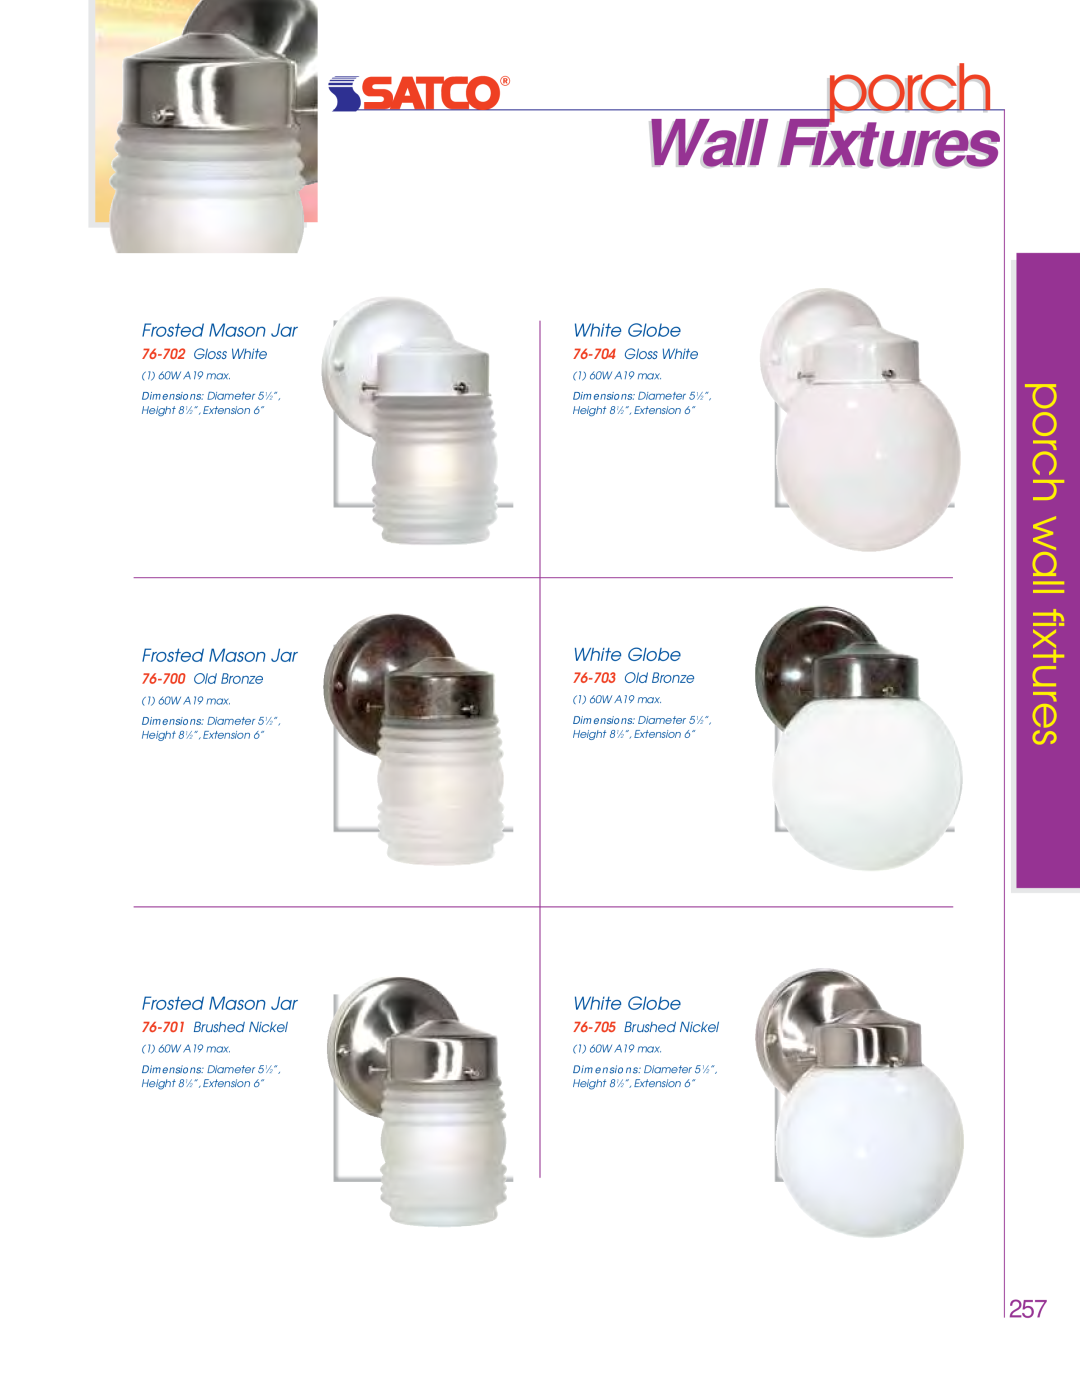 Satco Products 76-449 porch wall, fixtures, Frosted Mason Jar, Gloss White, Old Bronze, Brushed Nickel, Wall Fixtures 